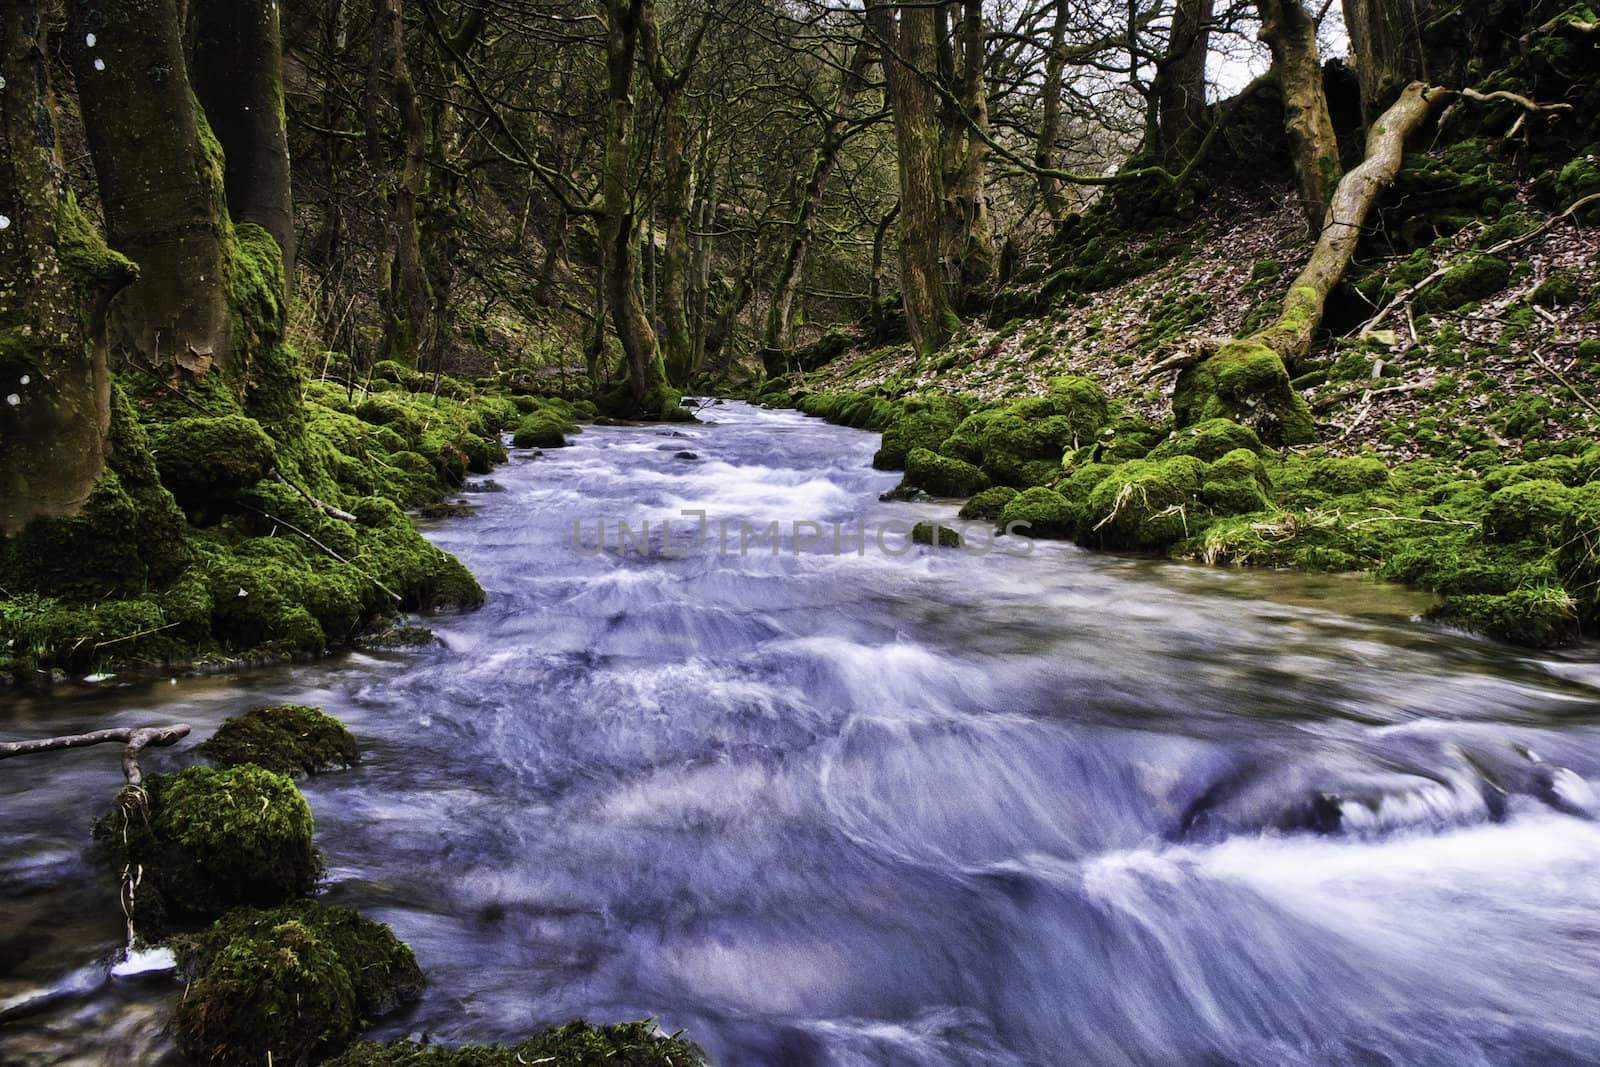 River flowing through mossy woodland by jrock635